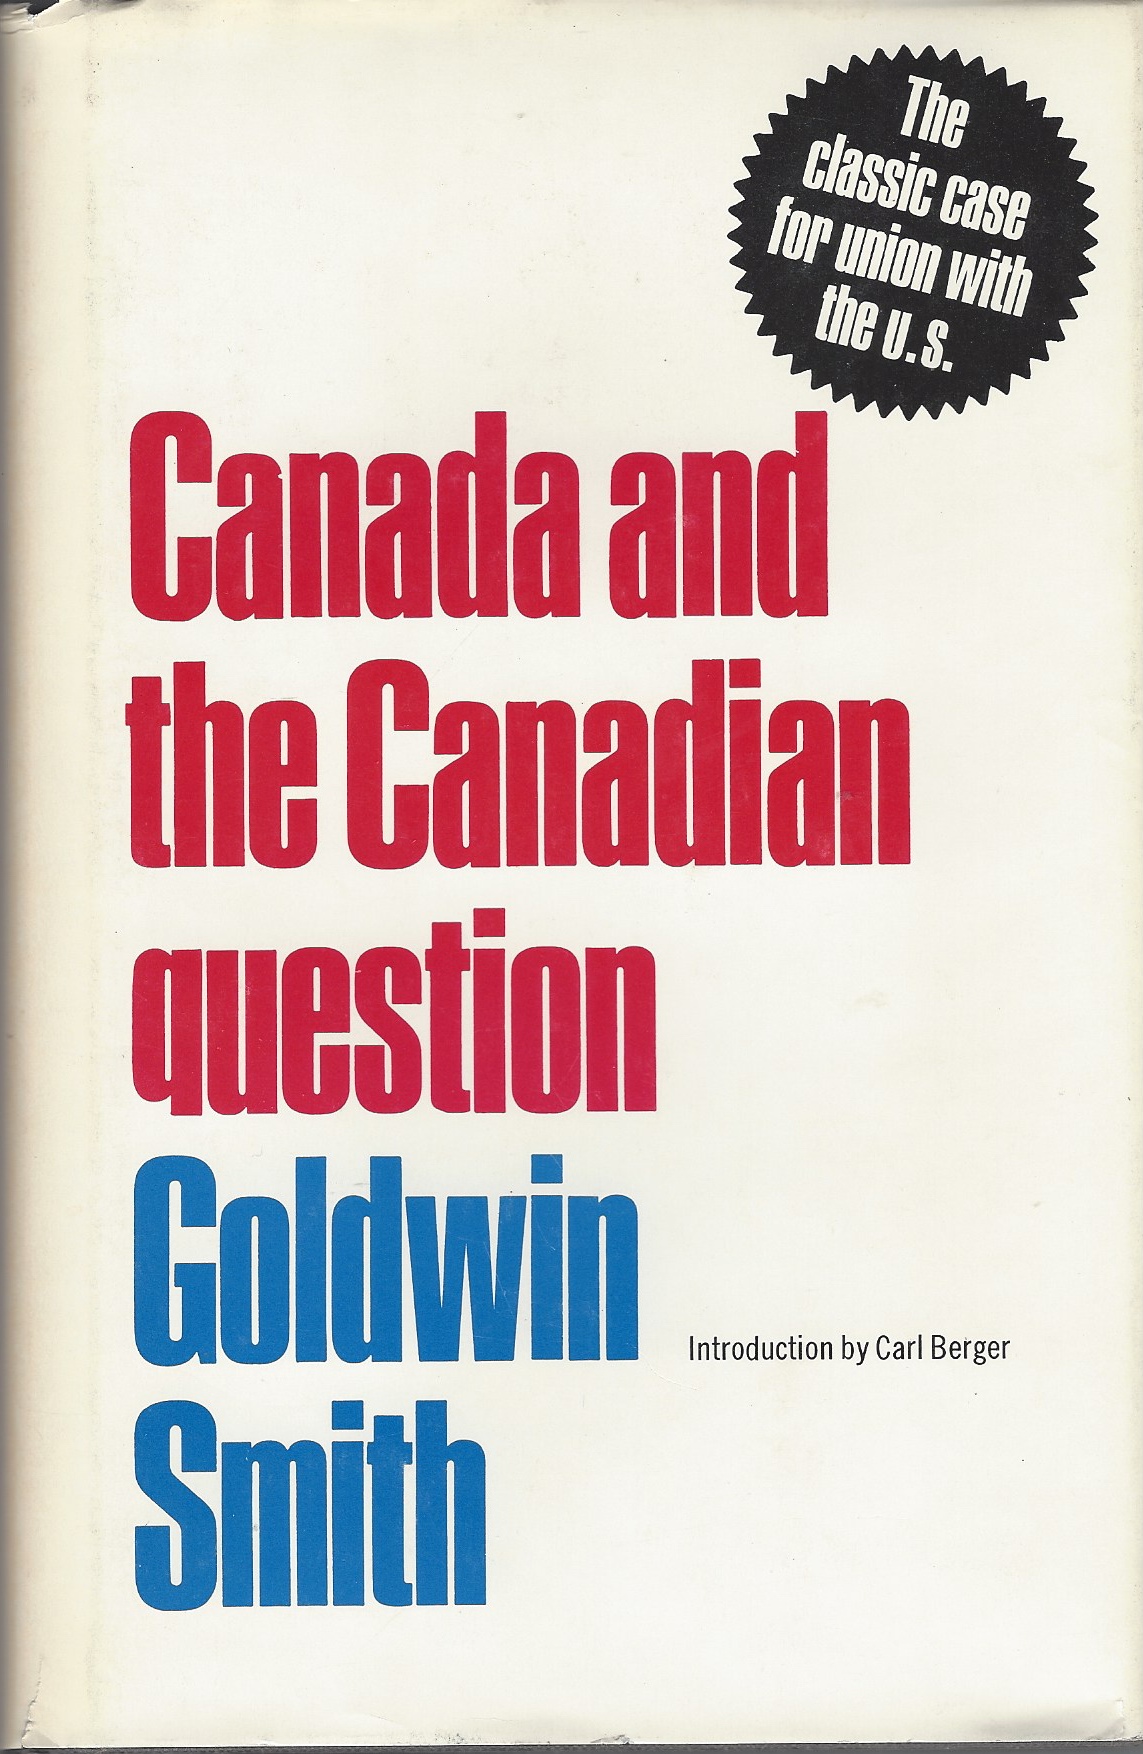 SMITH GOLDWIN - Canada and the Canadian Question the Classic Case for Union with the U.S.